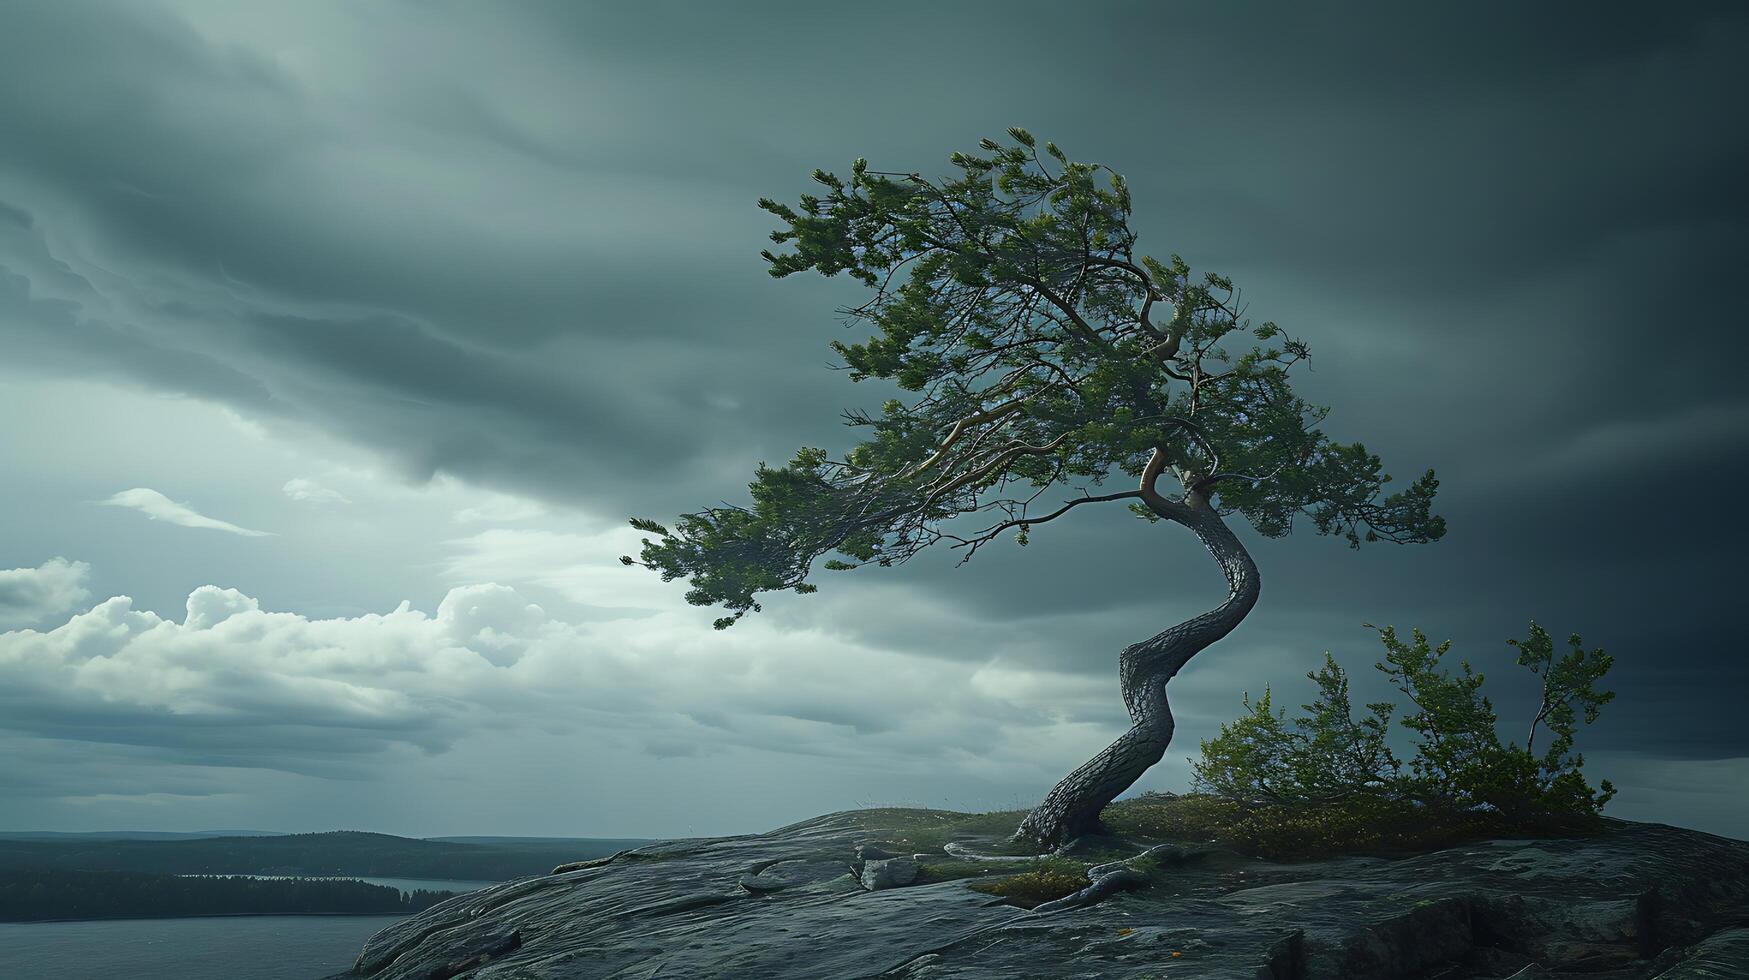 AI generated Resilient Tree Braces Against Storm Defiant Branches Firm Roots and Swirling Clouds Capture Strength in Adversity photo